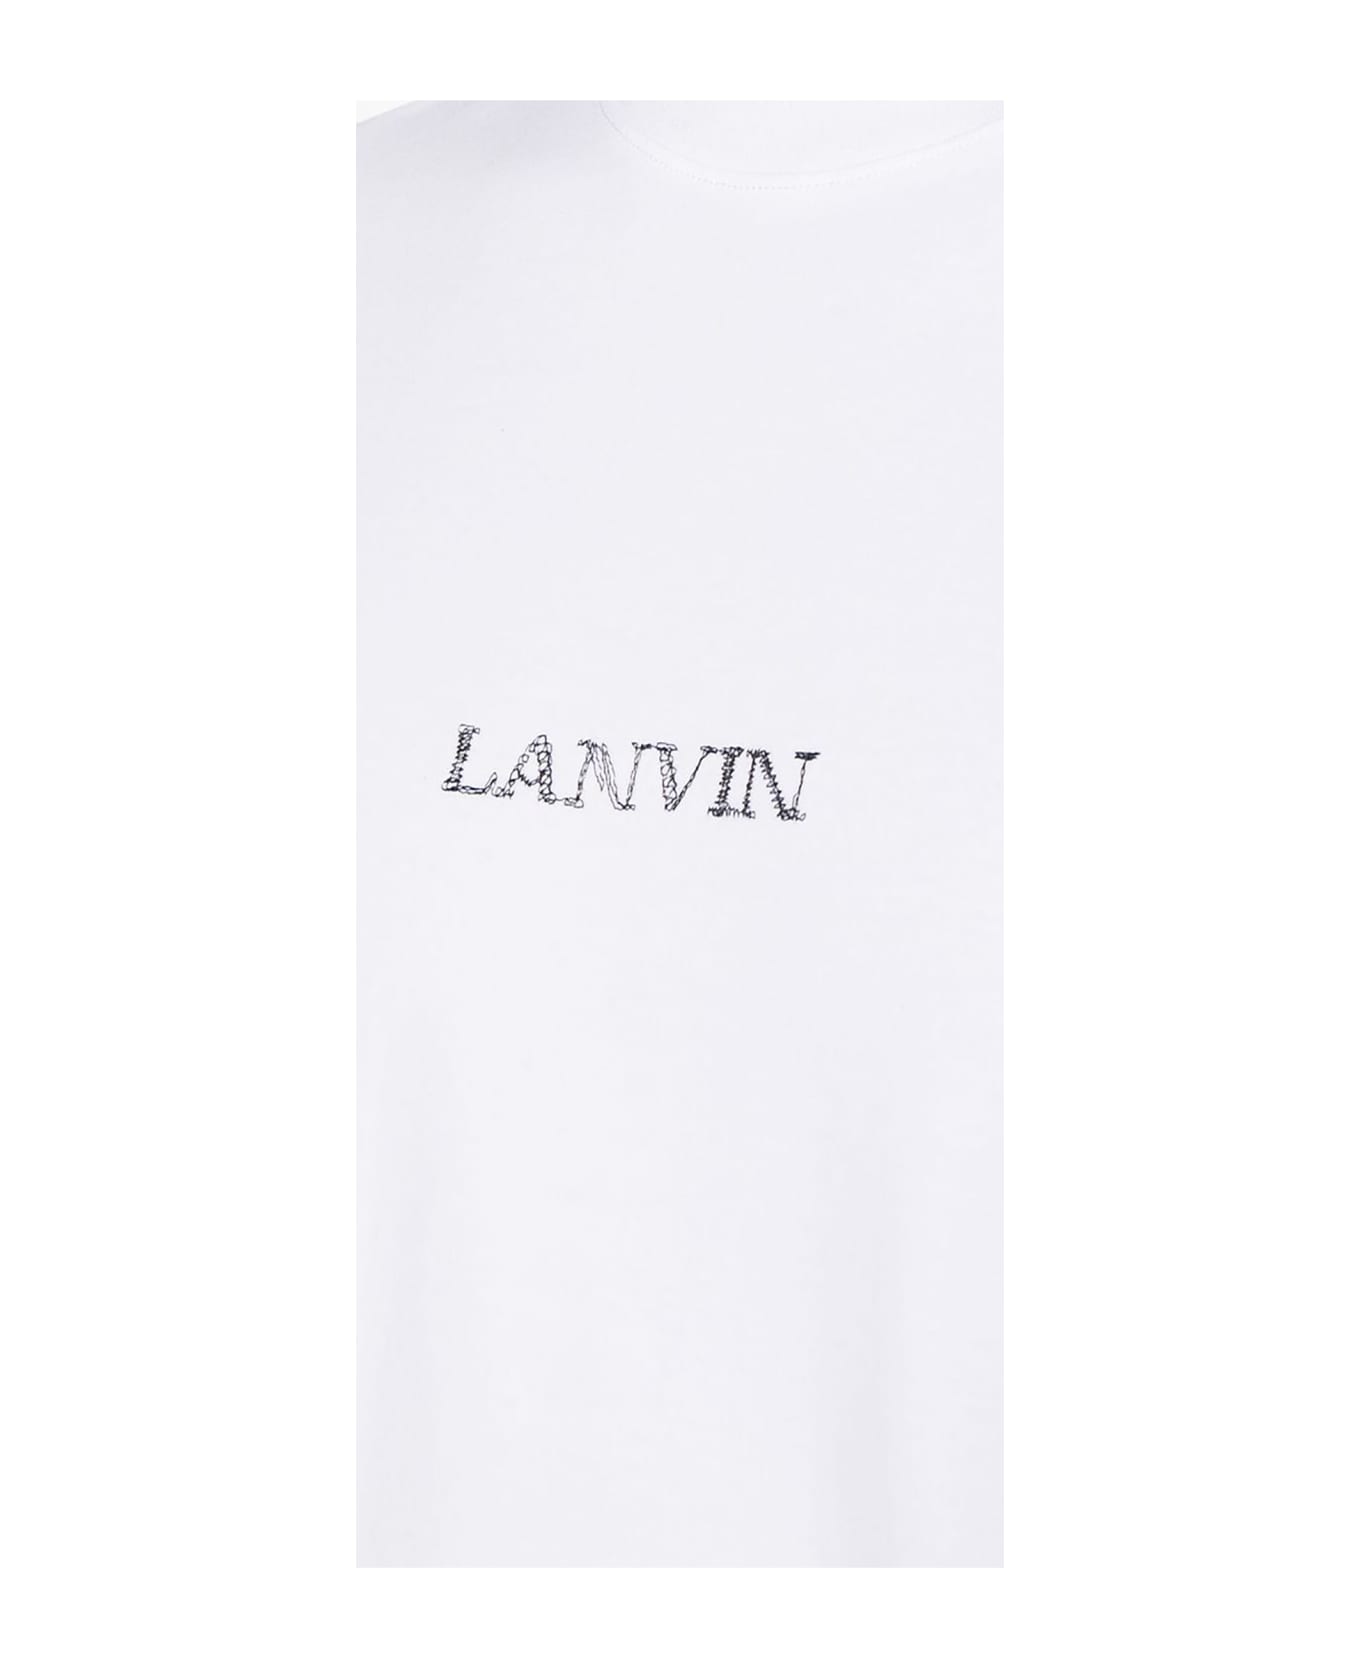 Lanvin T-shirts And Polos White - White シャツ